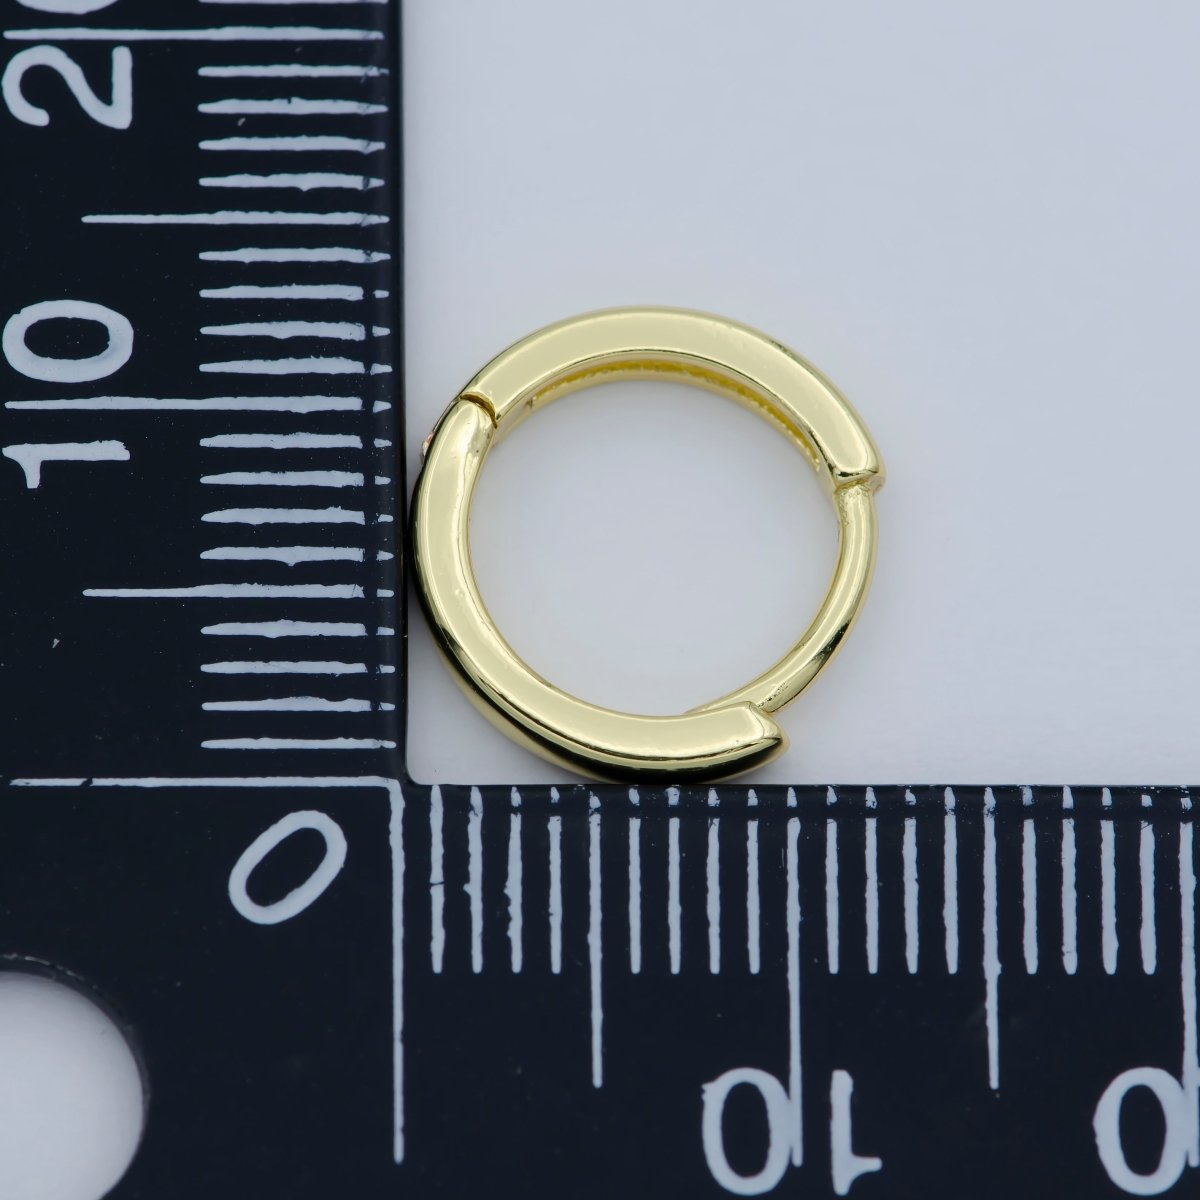 Dainty 12mm Huggie Earring, 24K Gold Filled Hoop Huggie for minimalist jewelry component Everday wear perfect gift for her P-263 - DLUXCA